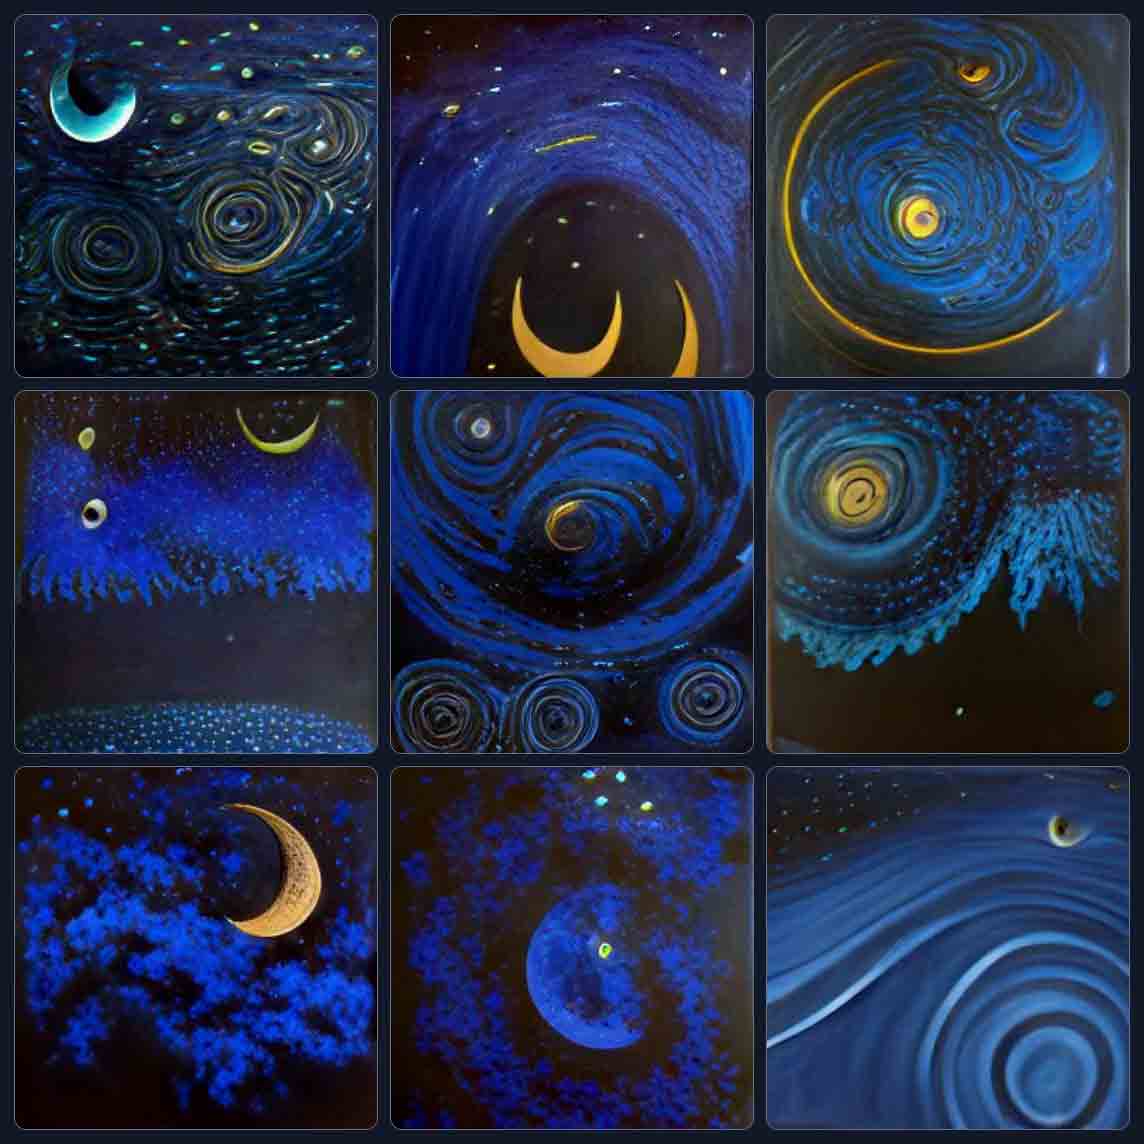 9 images showing mostly vibrant dark blue curves and clouds on black backgrounds, punctuated with yellow highlights with 5 images showing yellow crescent moons.